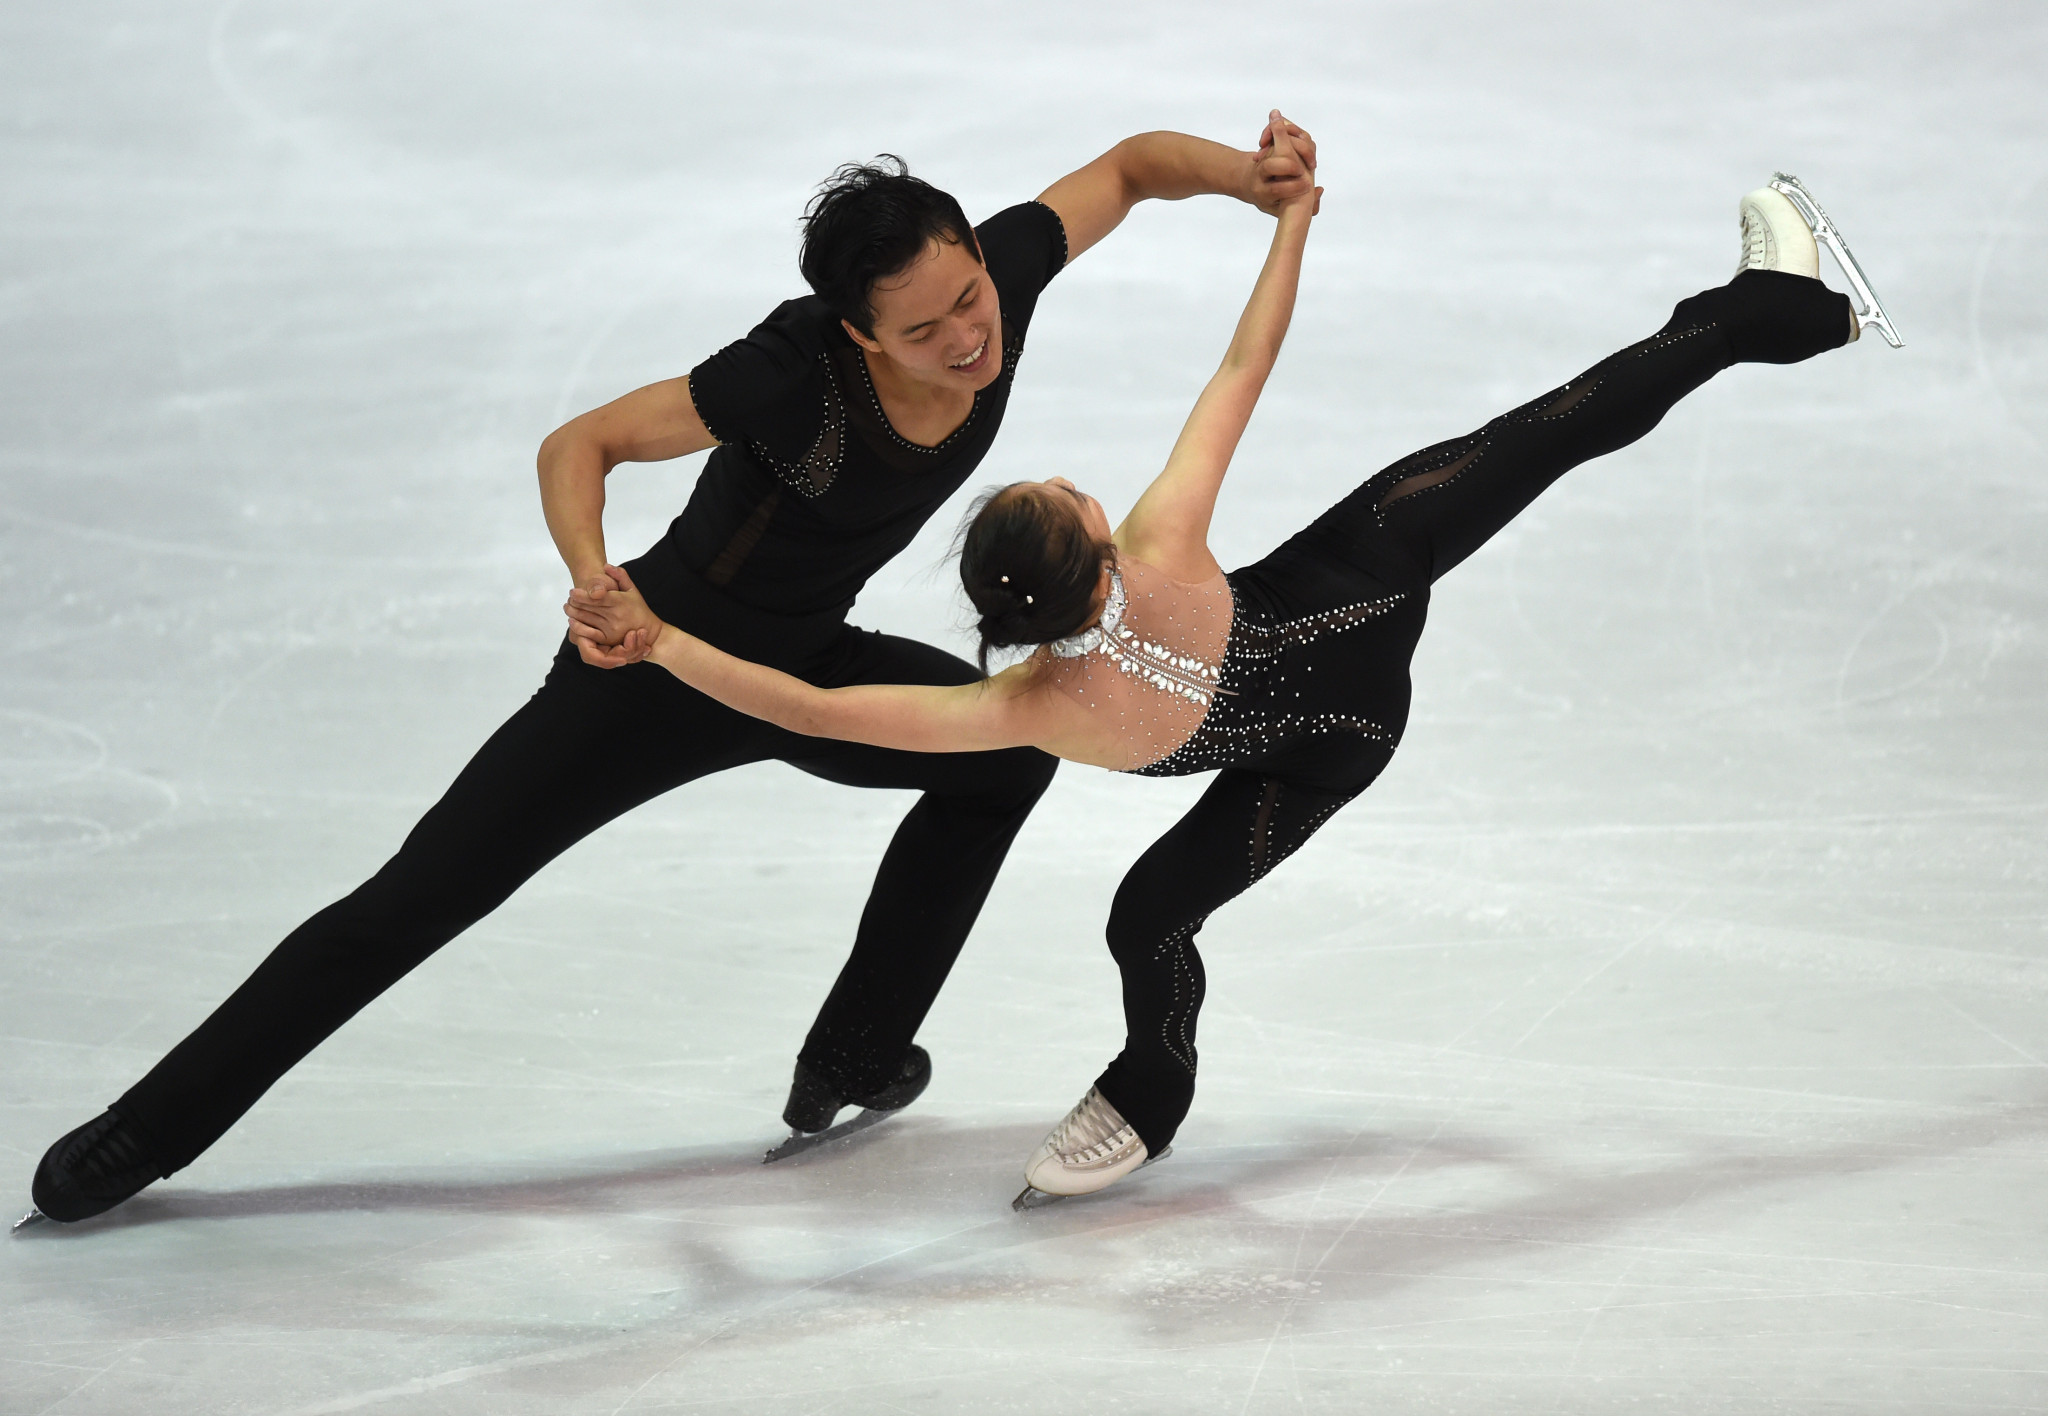 Ryom Tae-Ok and Kim Ju-Sik missed the ISU deadline for applying to the Olympic Games ©Getty Images